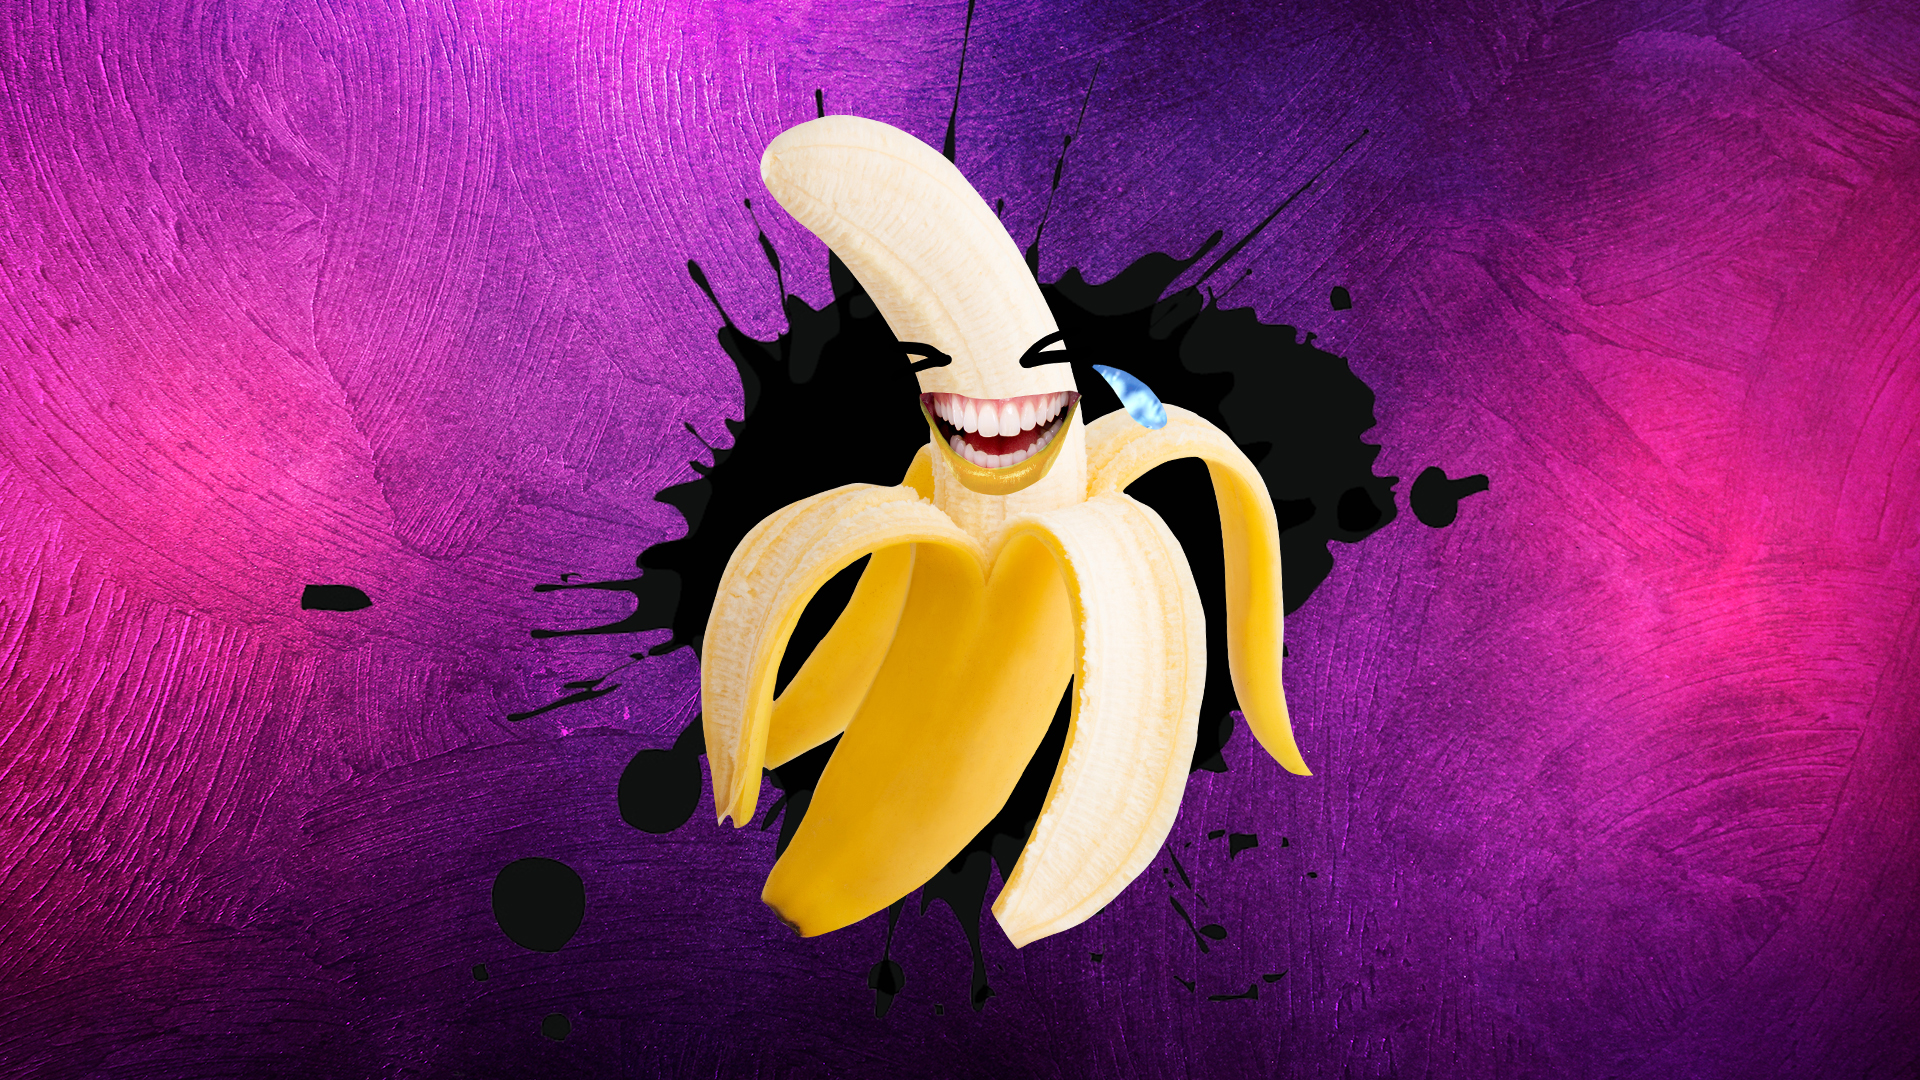 A laughing banana in front of a purple background